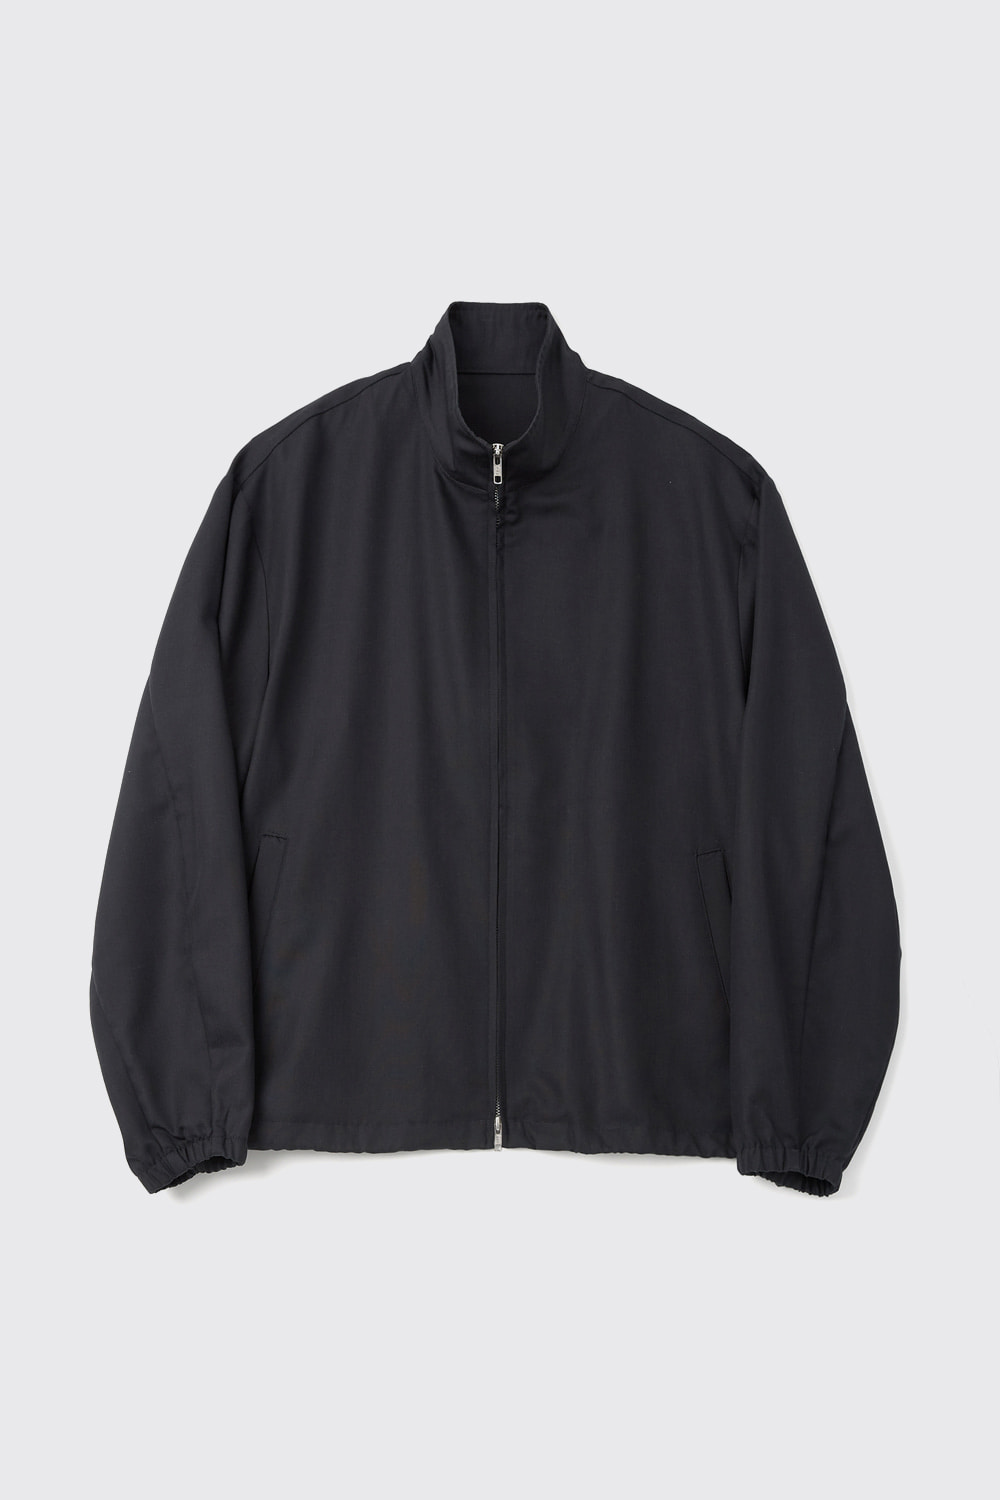 Vented Jacket Charcoal